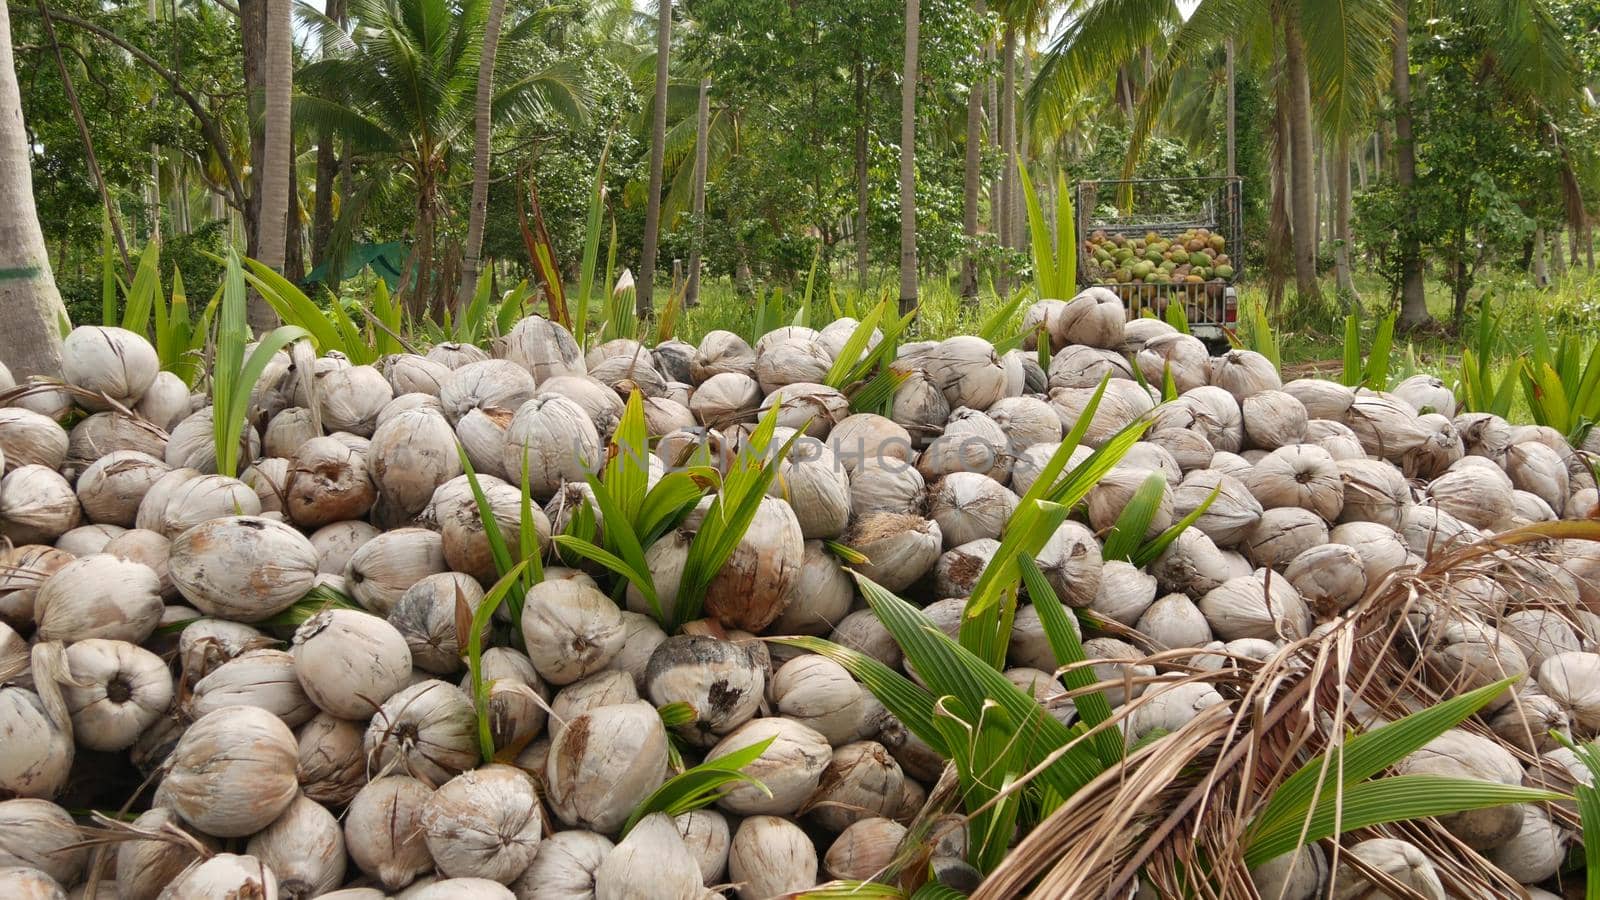 Coconut farm with big coconut ready for production. Large piles of ripe sorted coconuts for production of oil and pulp on coconut farm in Samui Thailand.